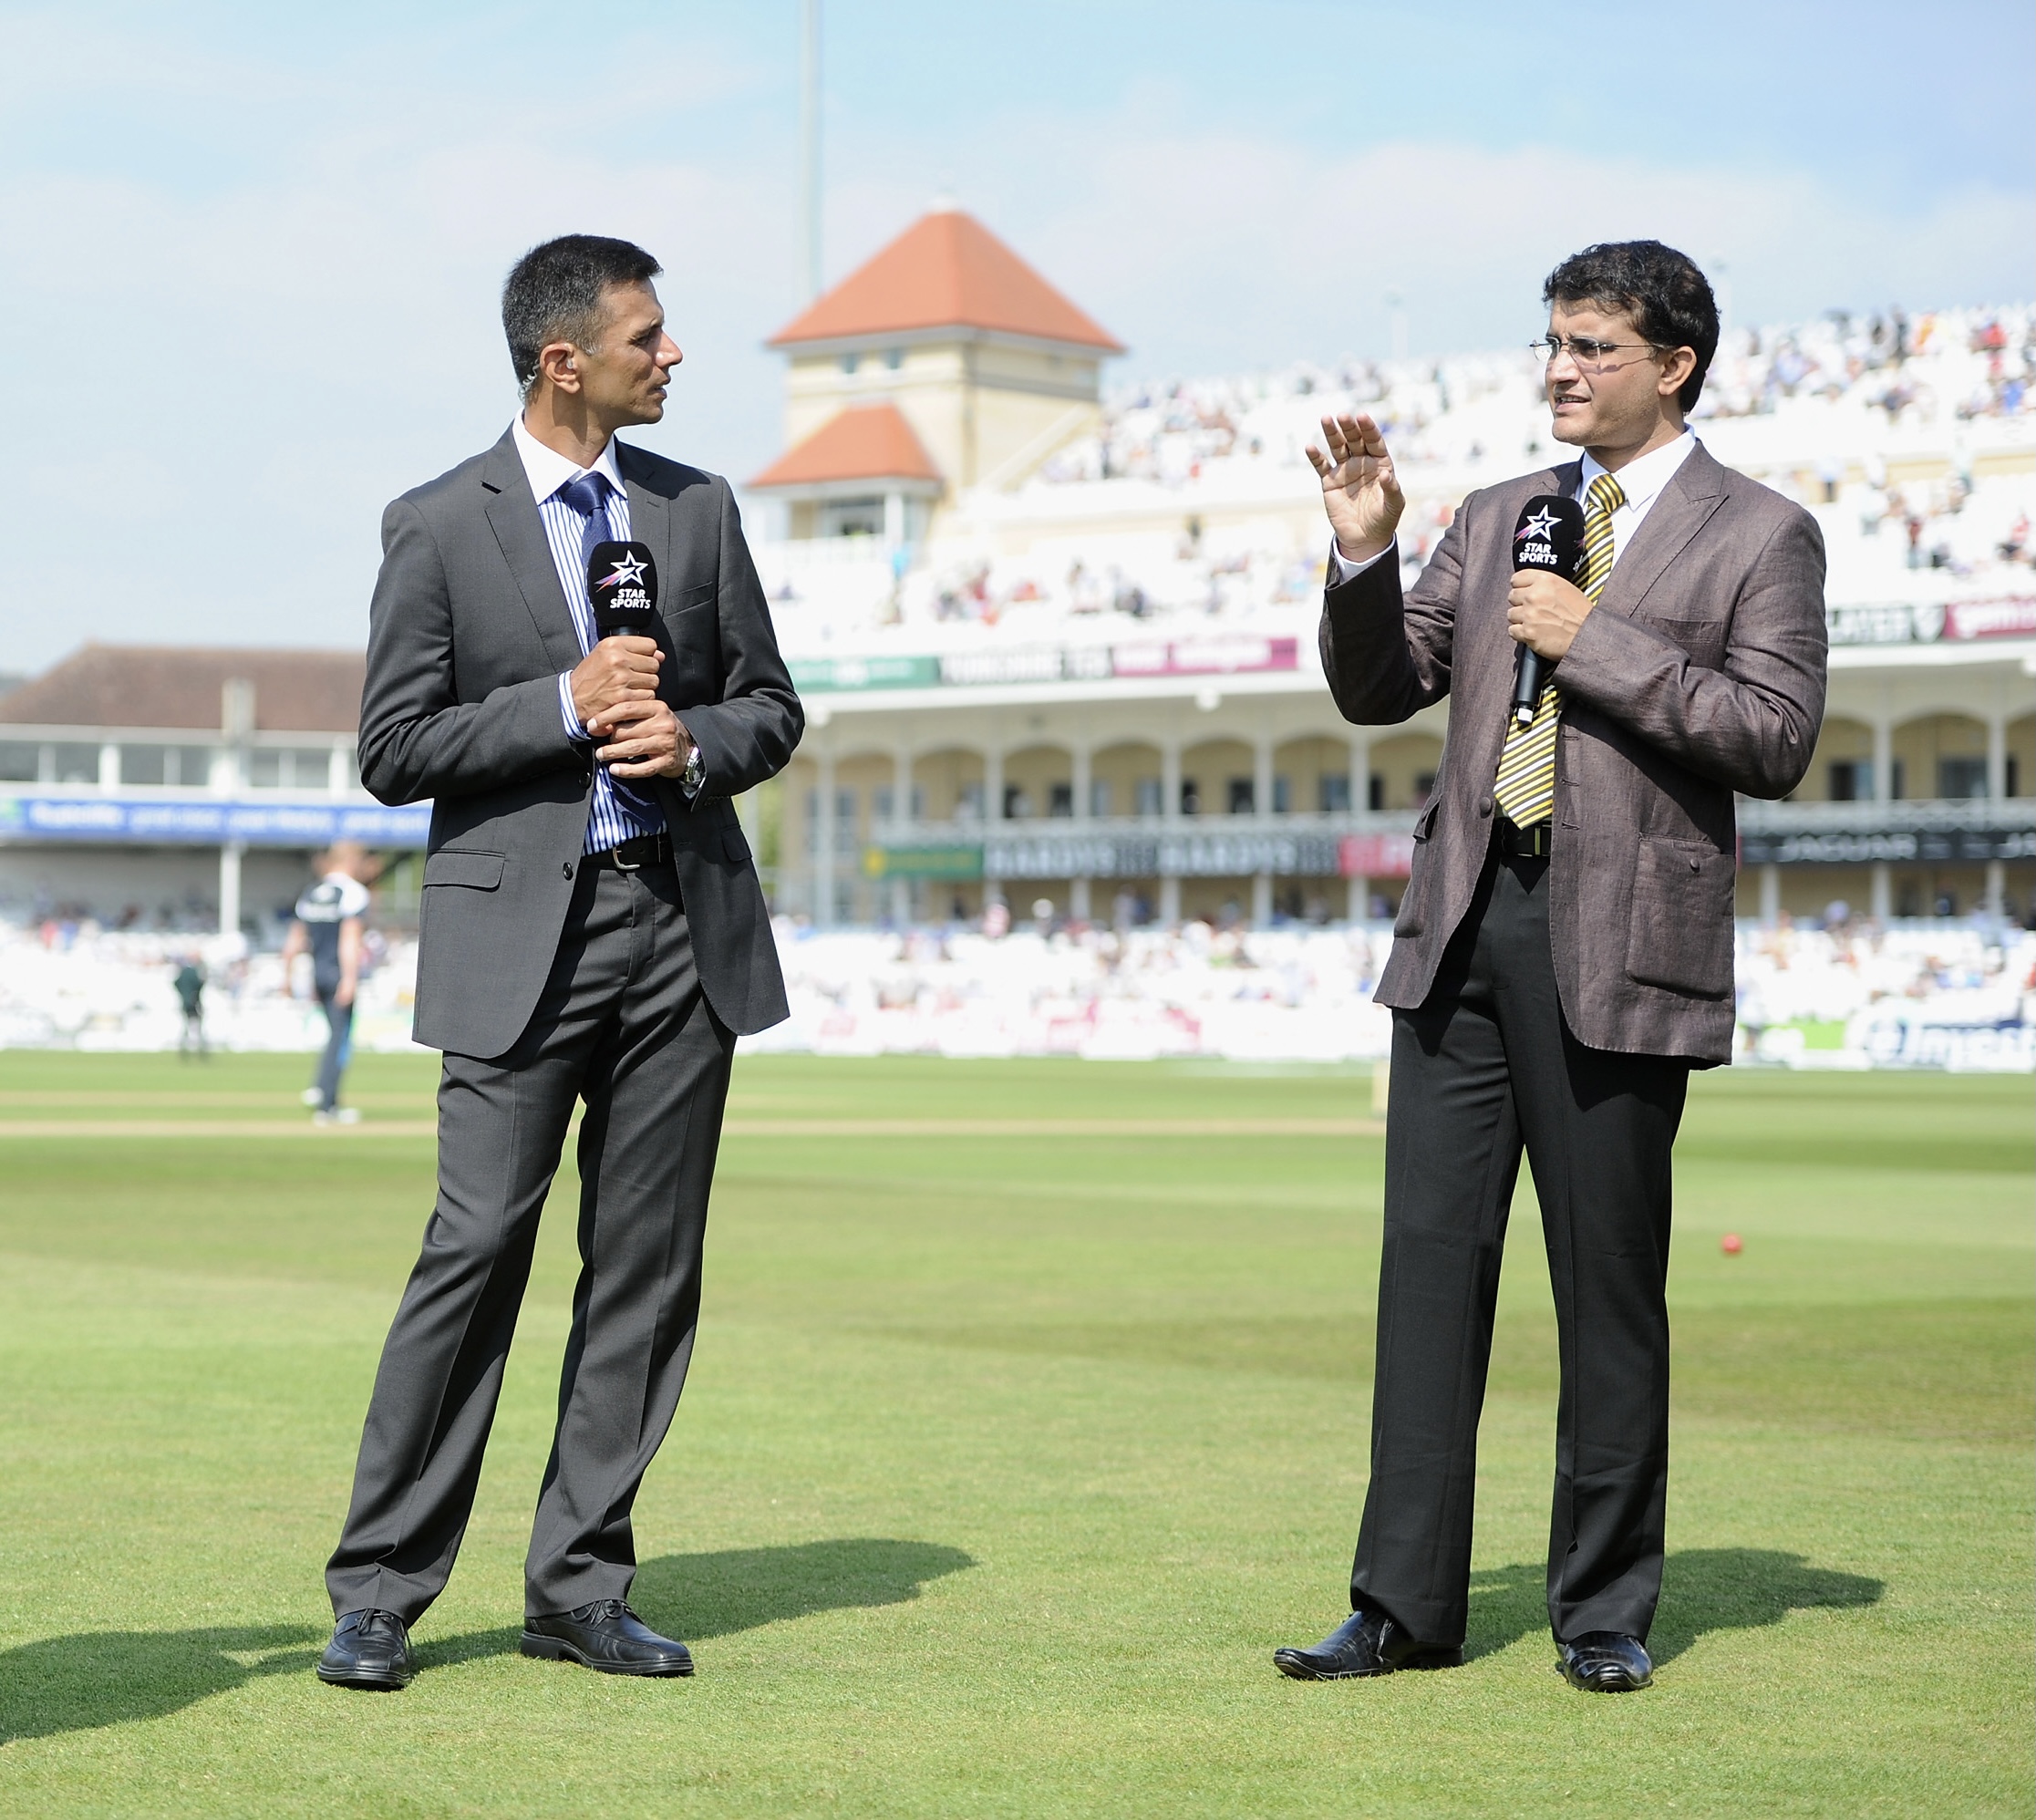 Rahul Dravid and Sourav Ganguly | Getty Images